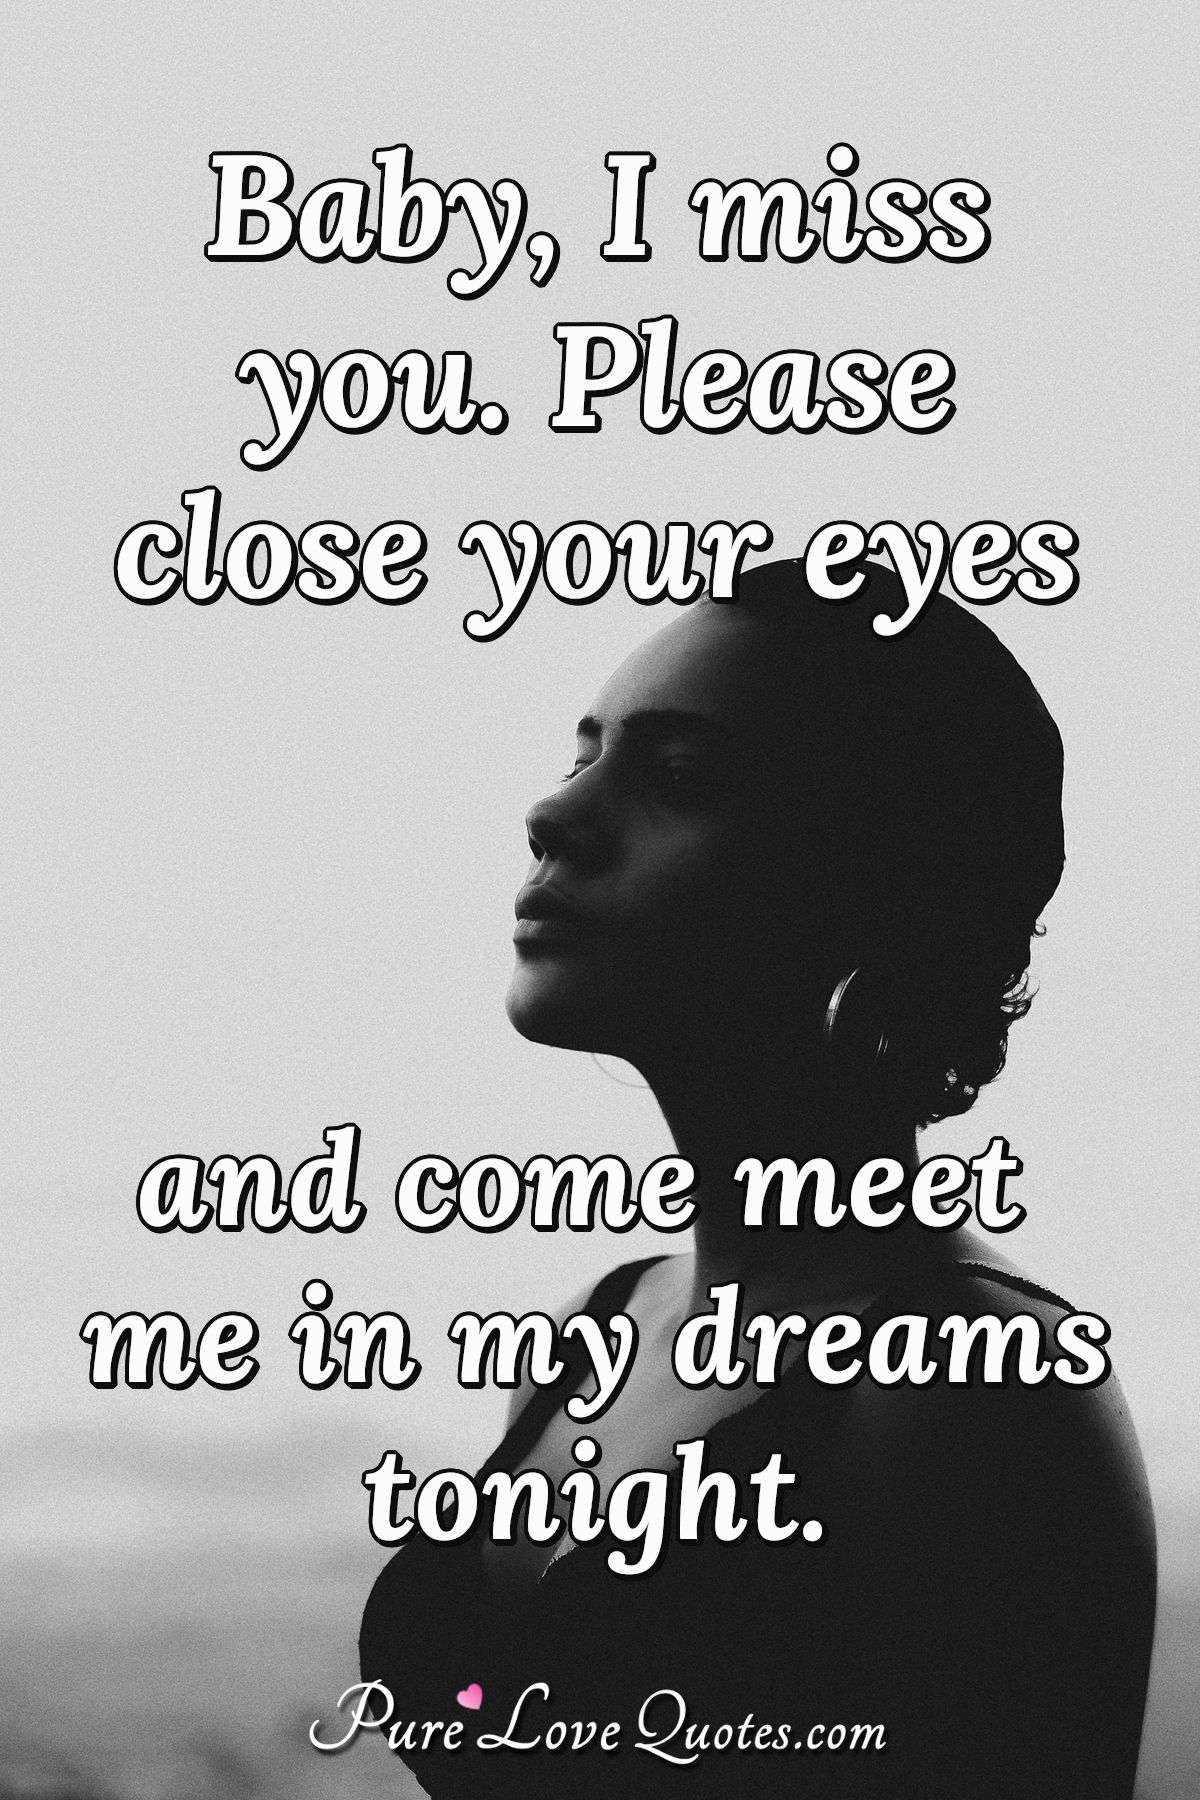 Baby, I miss you. Please close your eyes and come meet me in my dreams tonight. - Anonymous